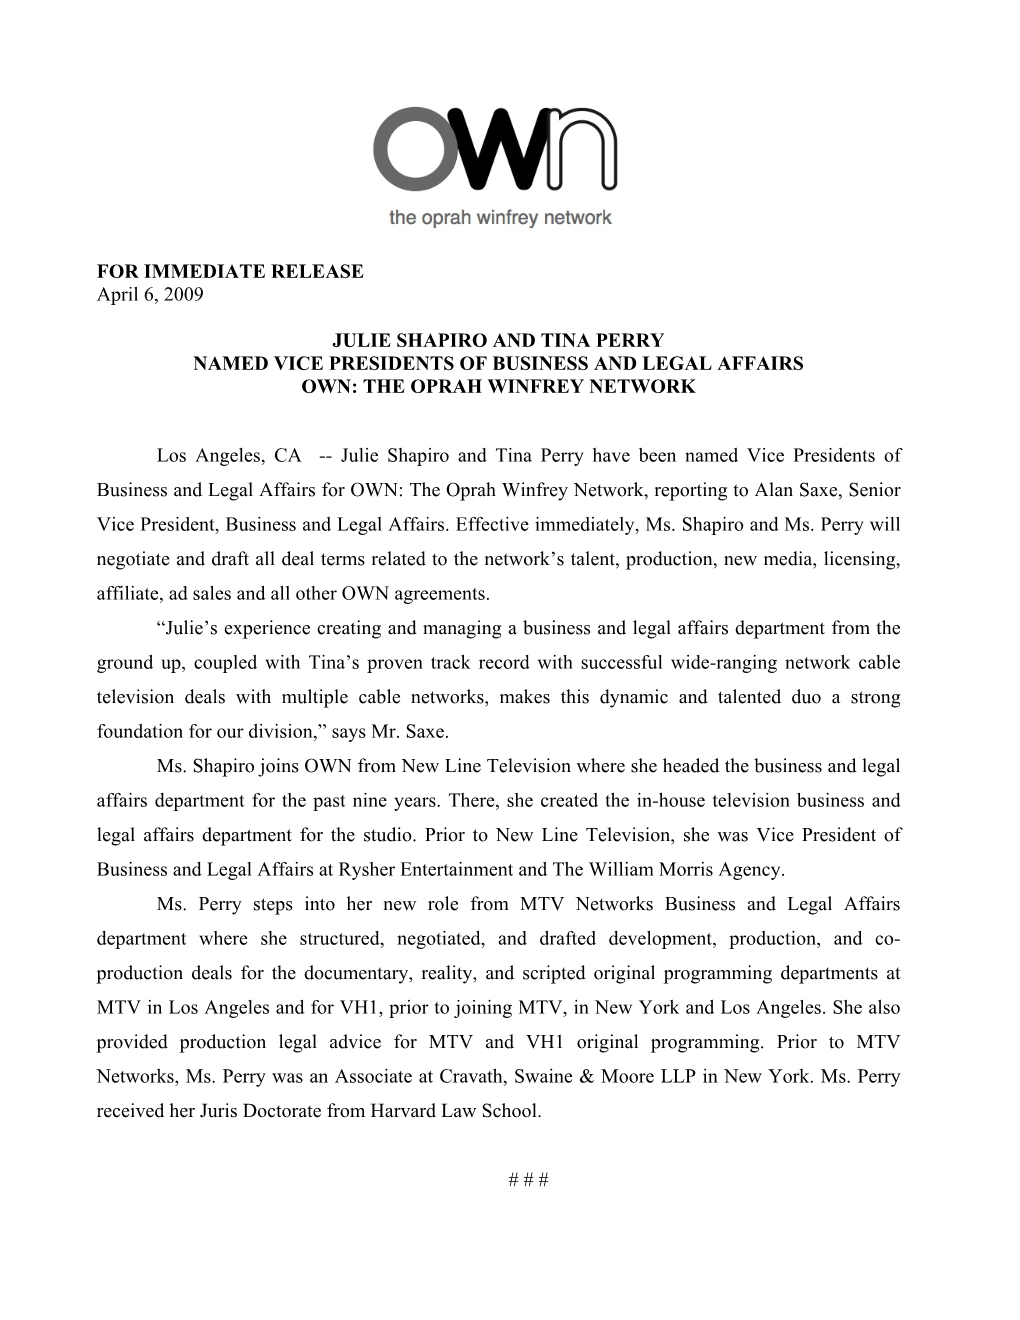 FOR IMMEDIATE RELEASE April 6, 2009 JULIE SHAPIRO and TINA